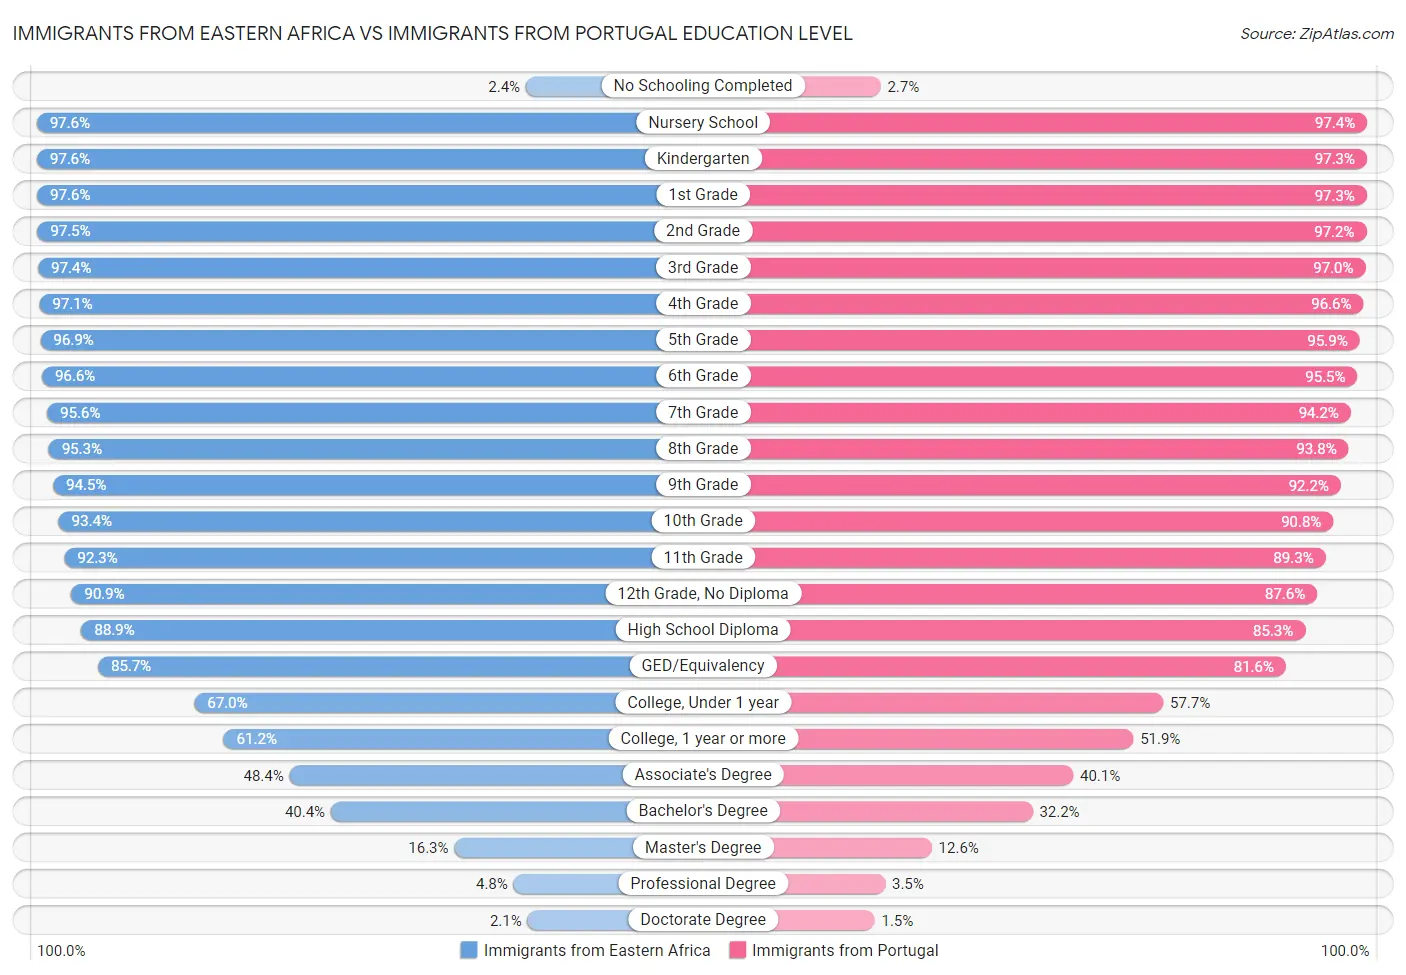 Immigrants from Eastern Africa vs Immigrants from Portugal Education Level